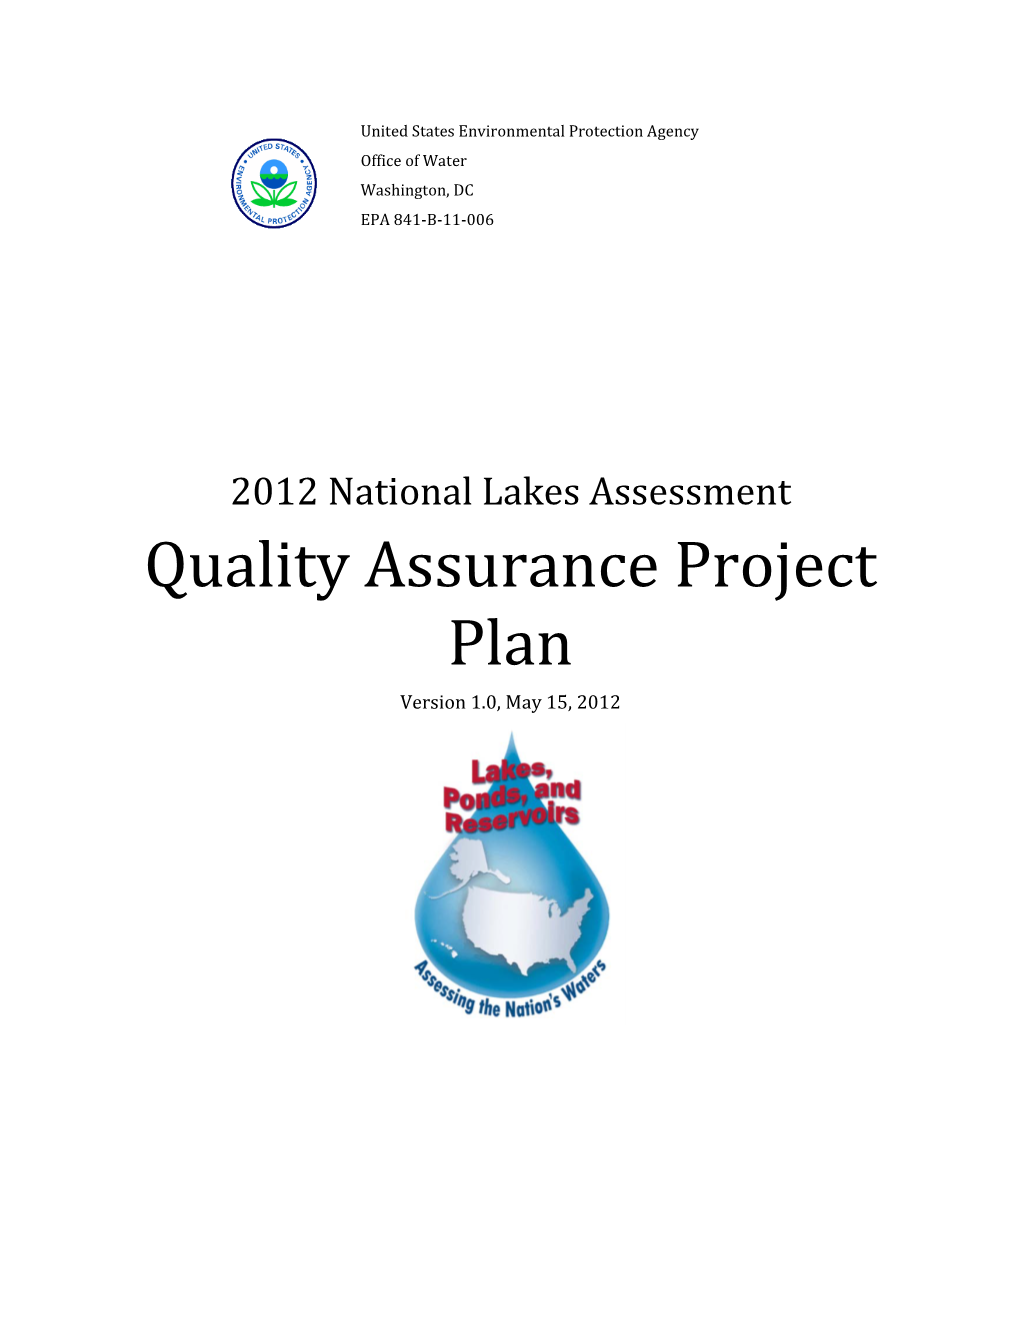 Quality Assurance Project Plan Version 1.0, May 15, 2012